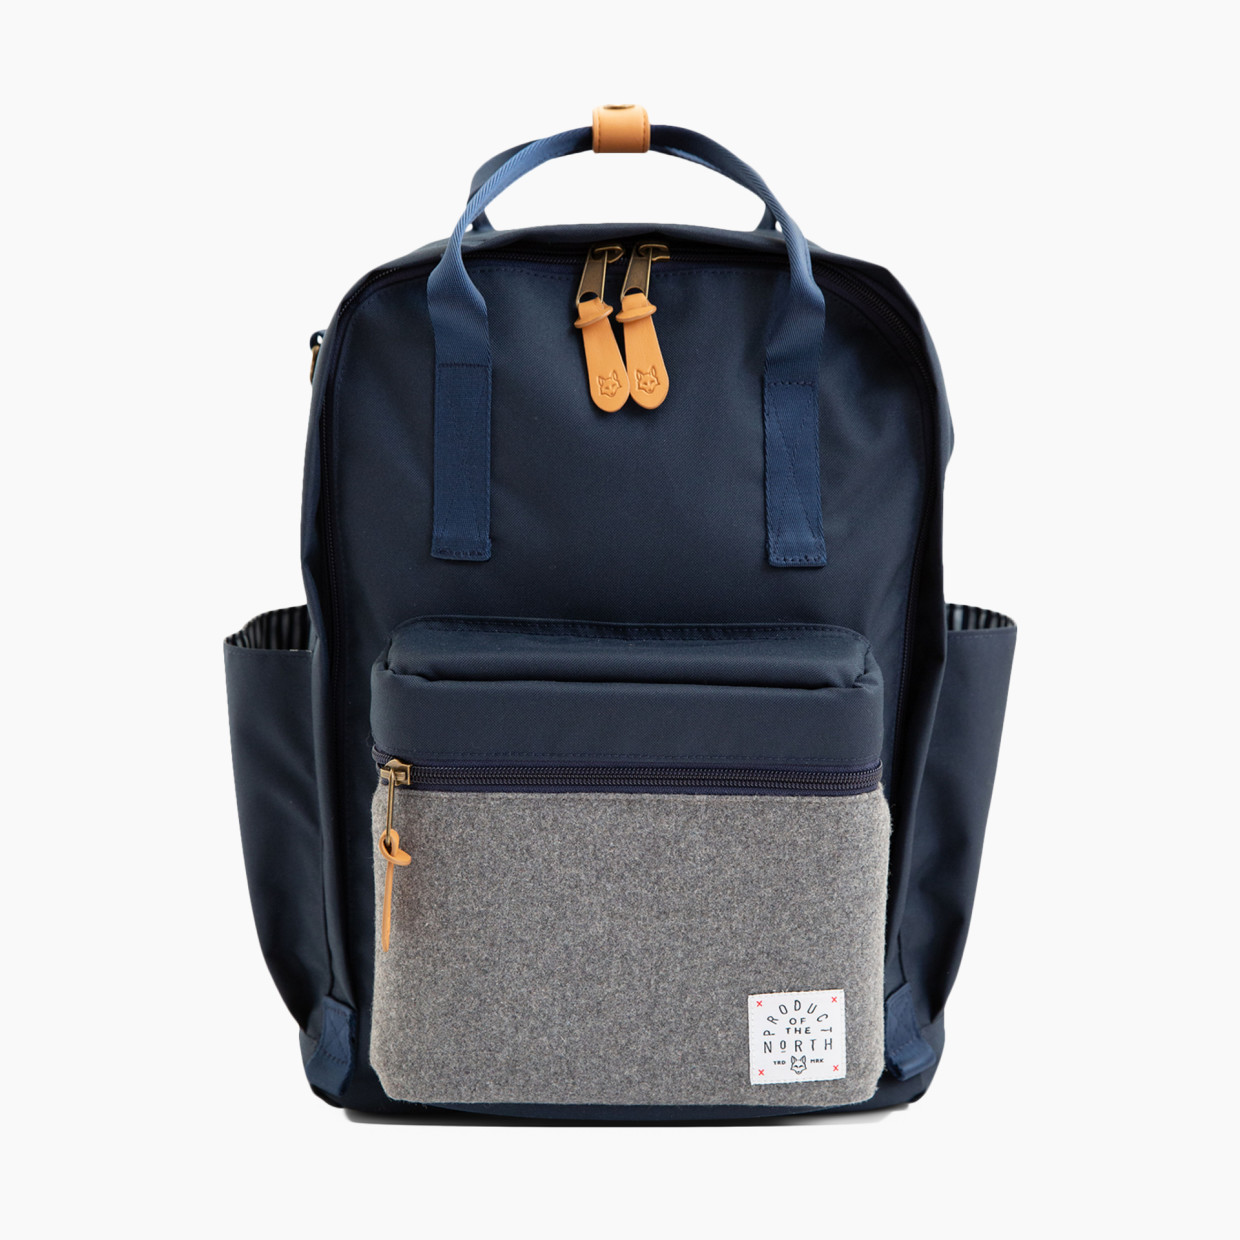 Product of the North Sustainable Elkin Diaper Bag Backpack - Navy.